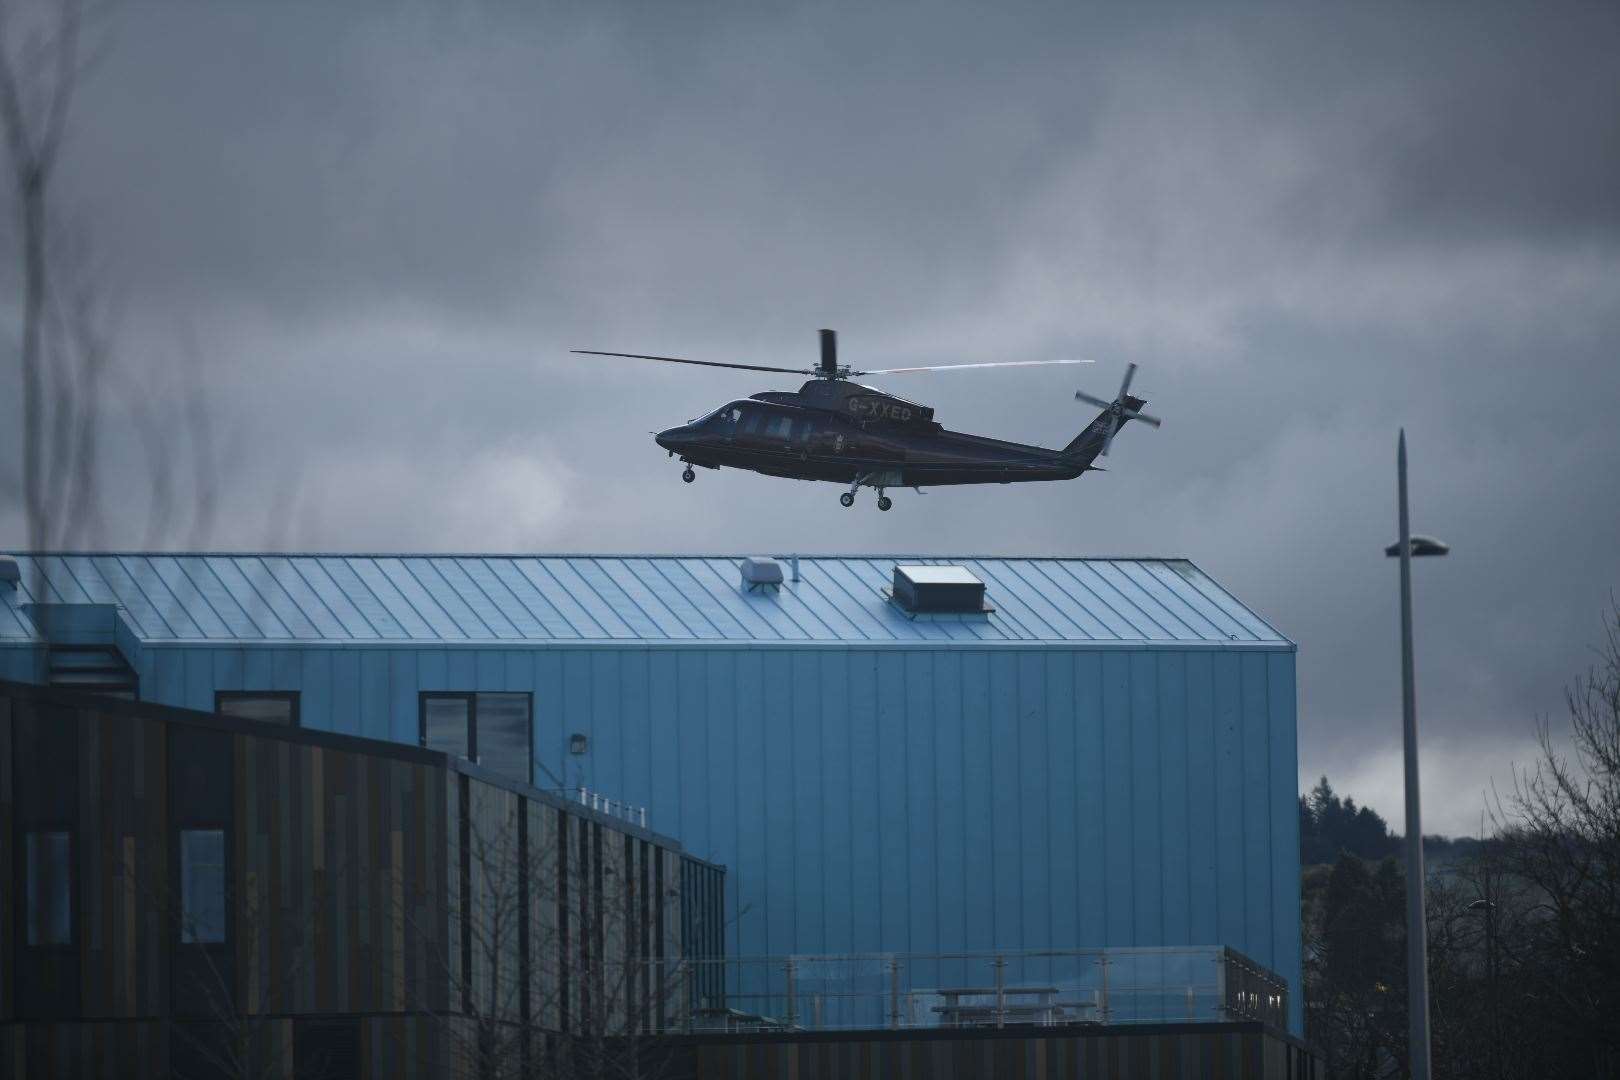 Princess Anne arriving by helicopter in Inverness.